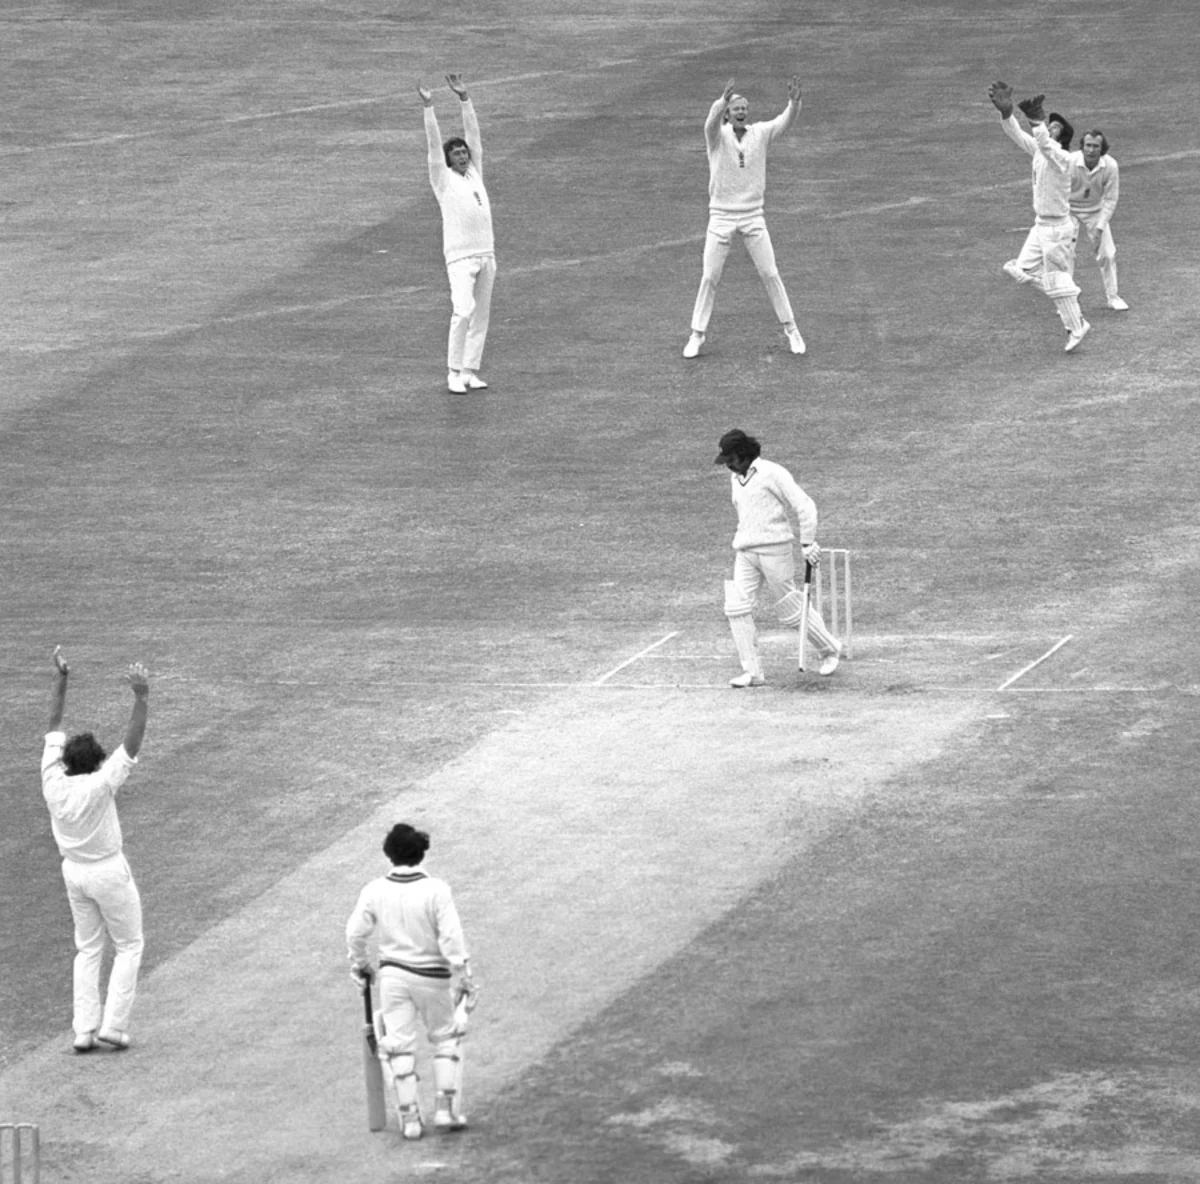 Lord's Test 1974